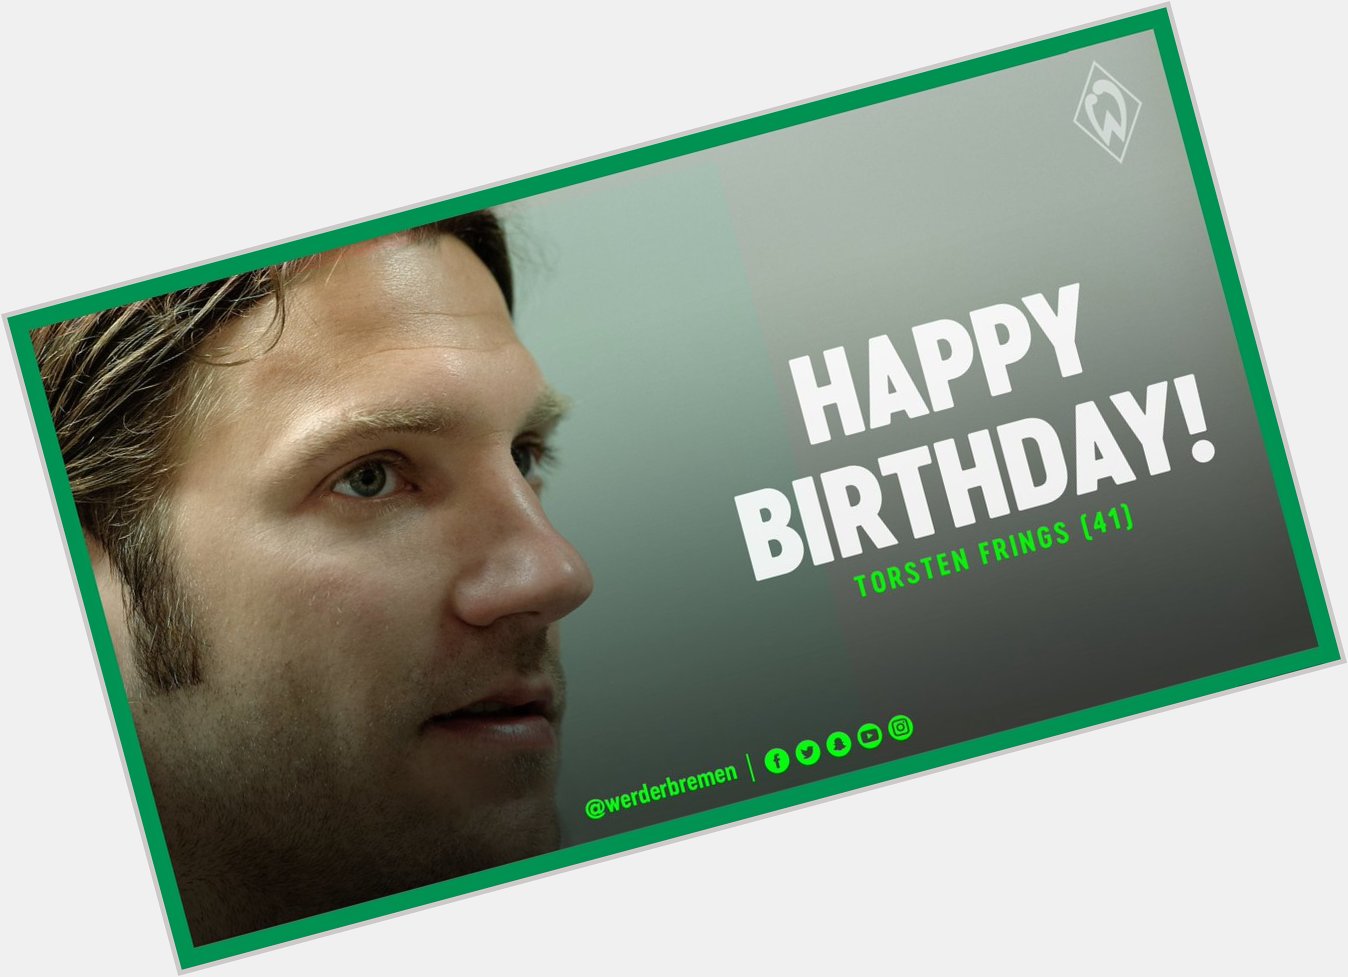 All the very best to you, Torsten Happy Birthday!  